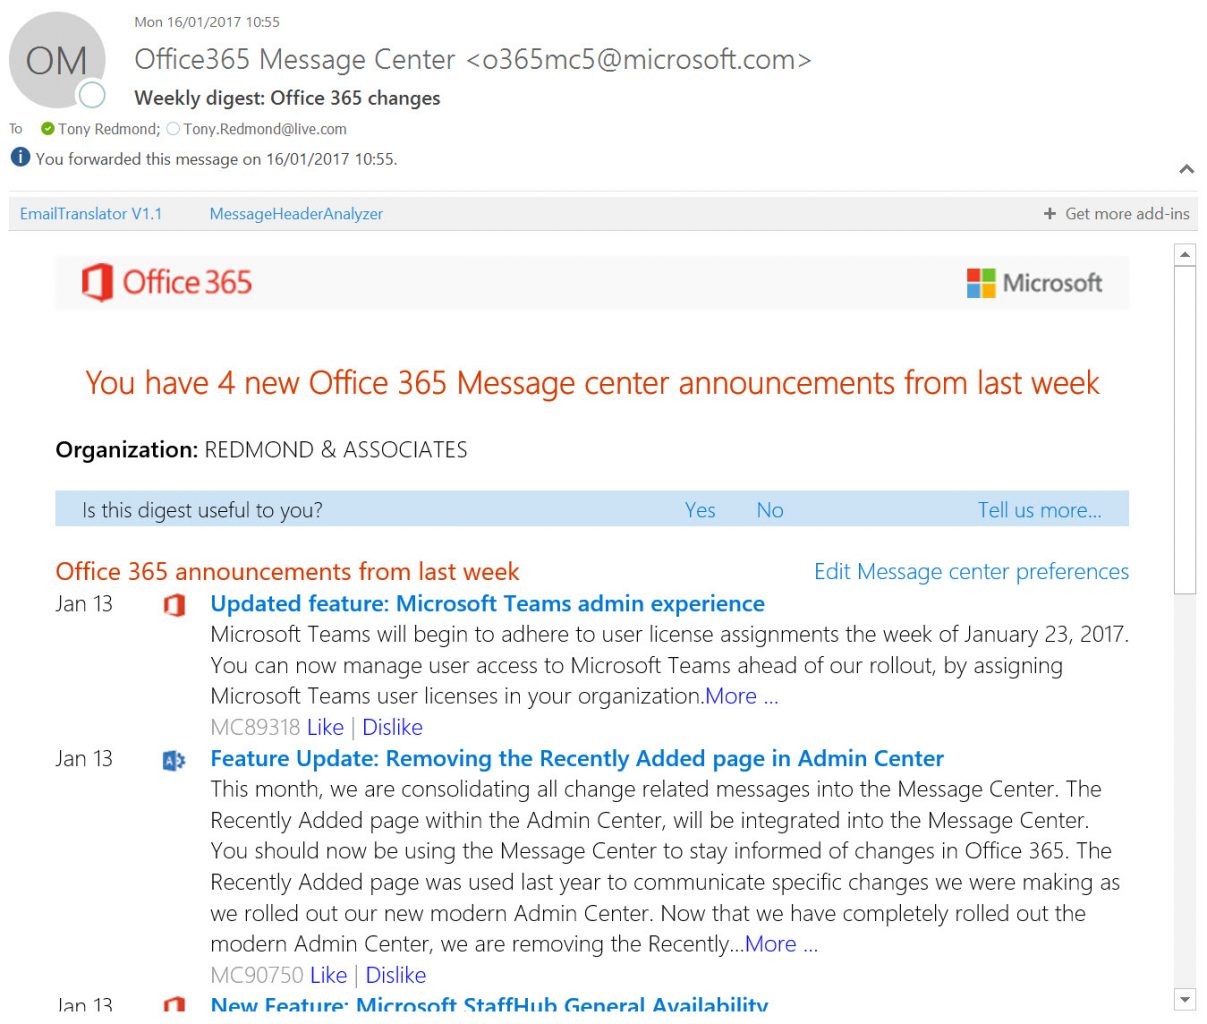 Weekly digest of Office 365 updates